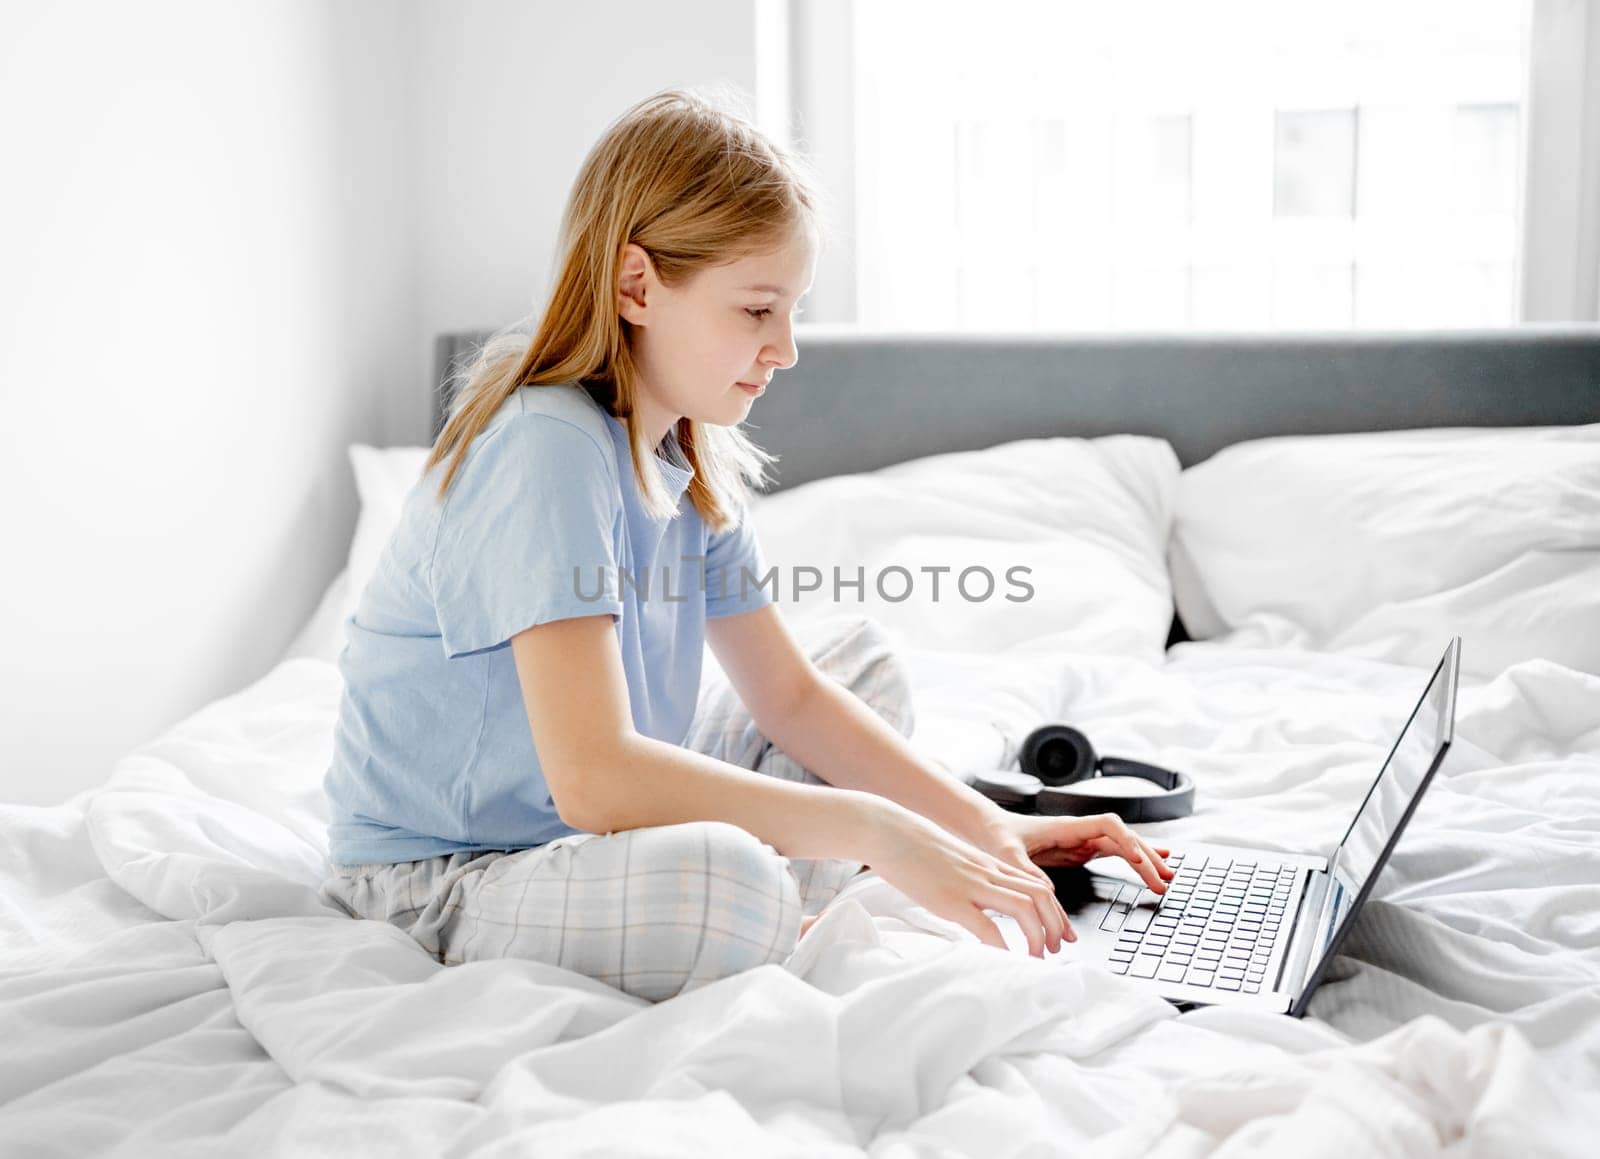 Girl Sitting In Bed With Laptop by tan4ikk1